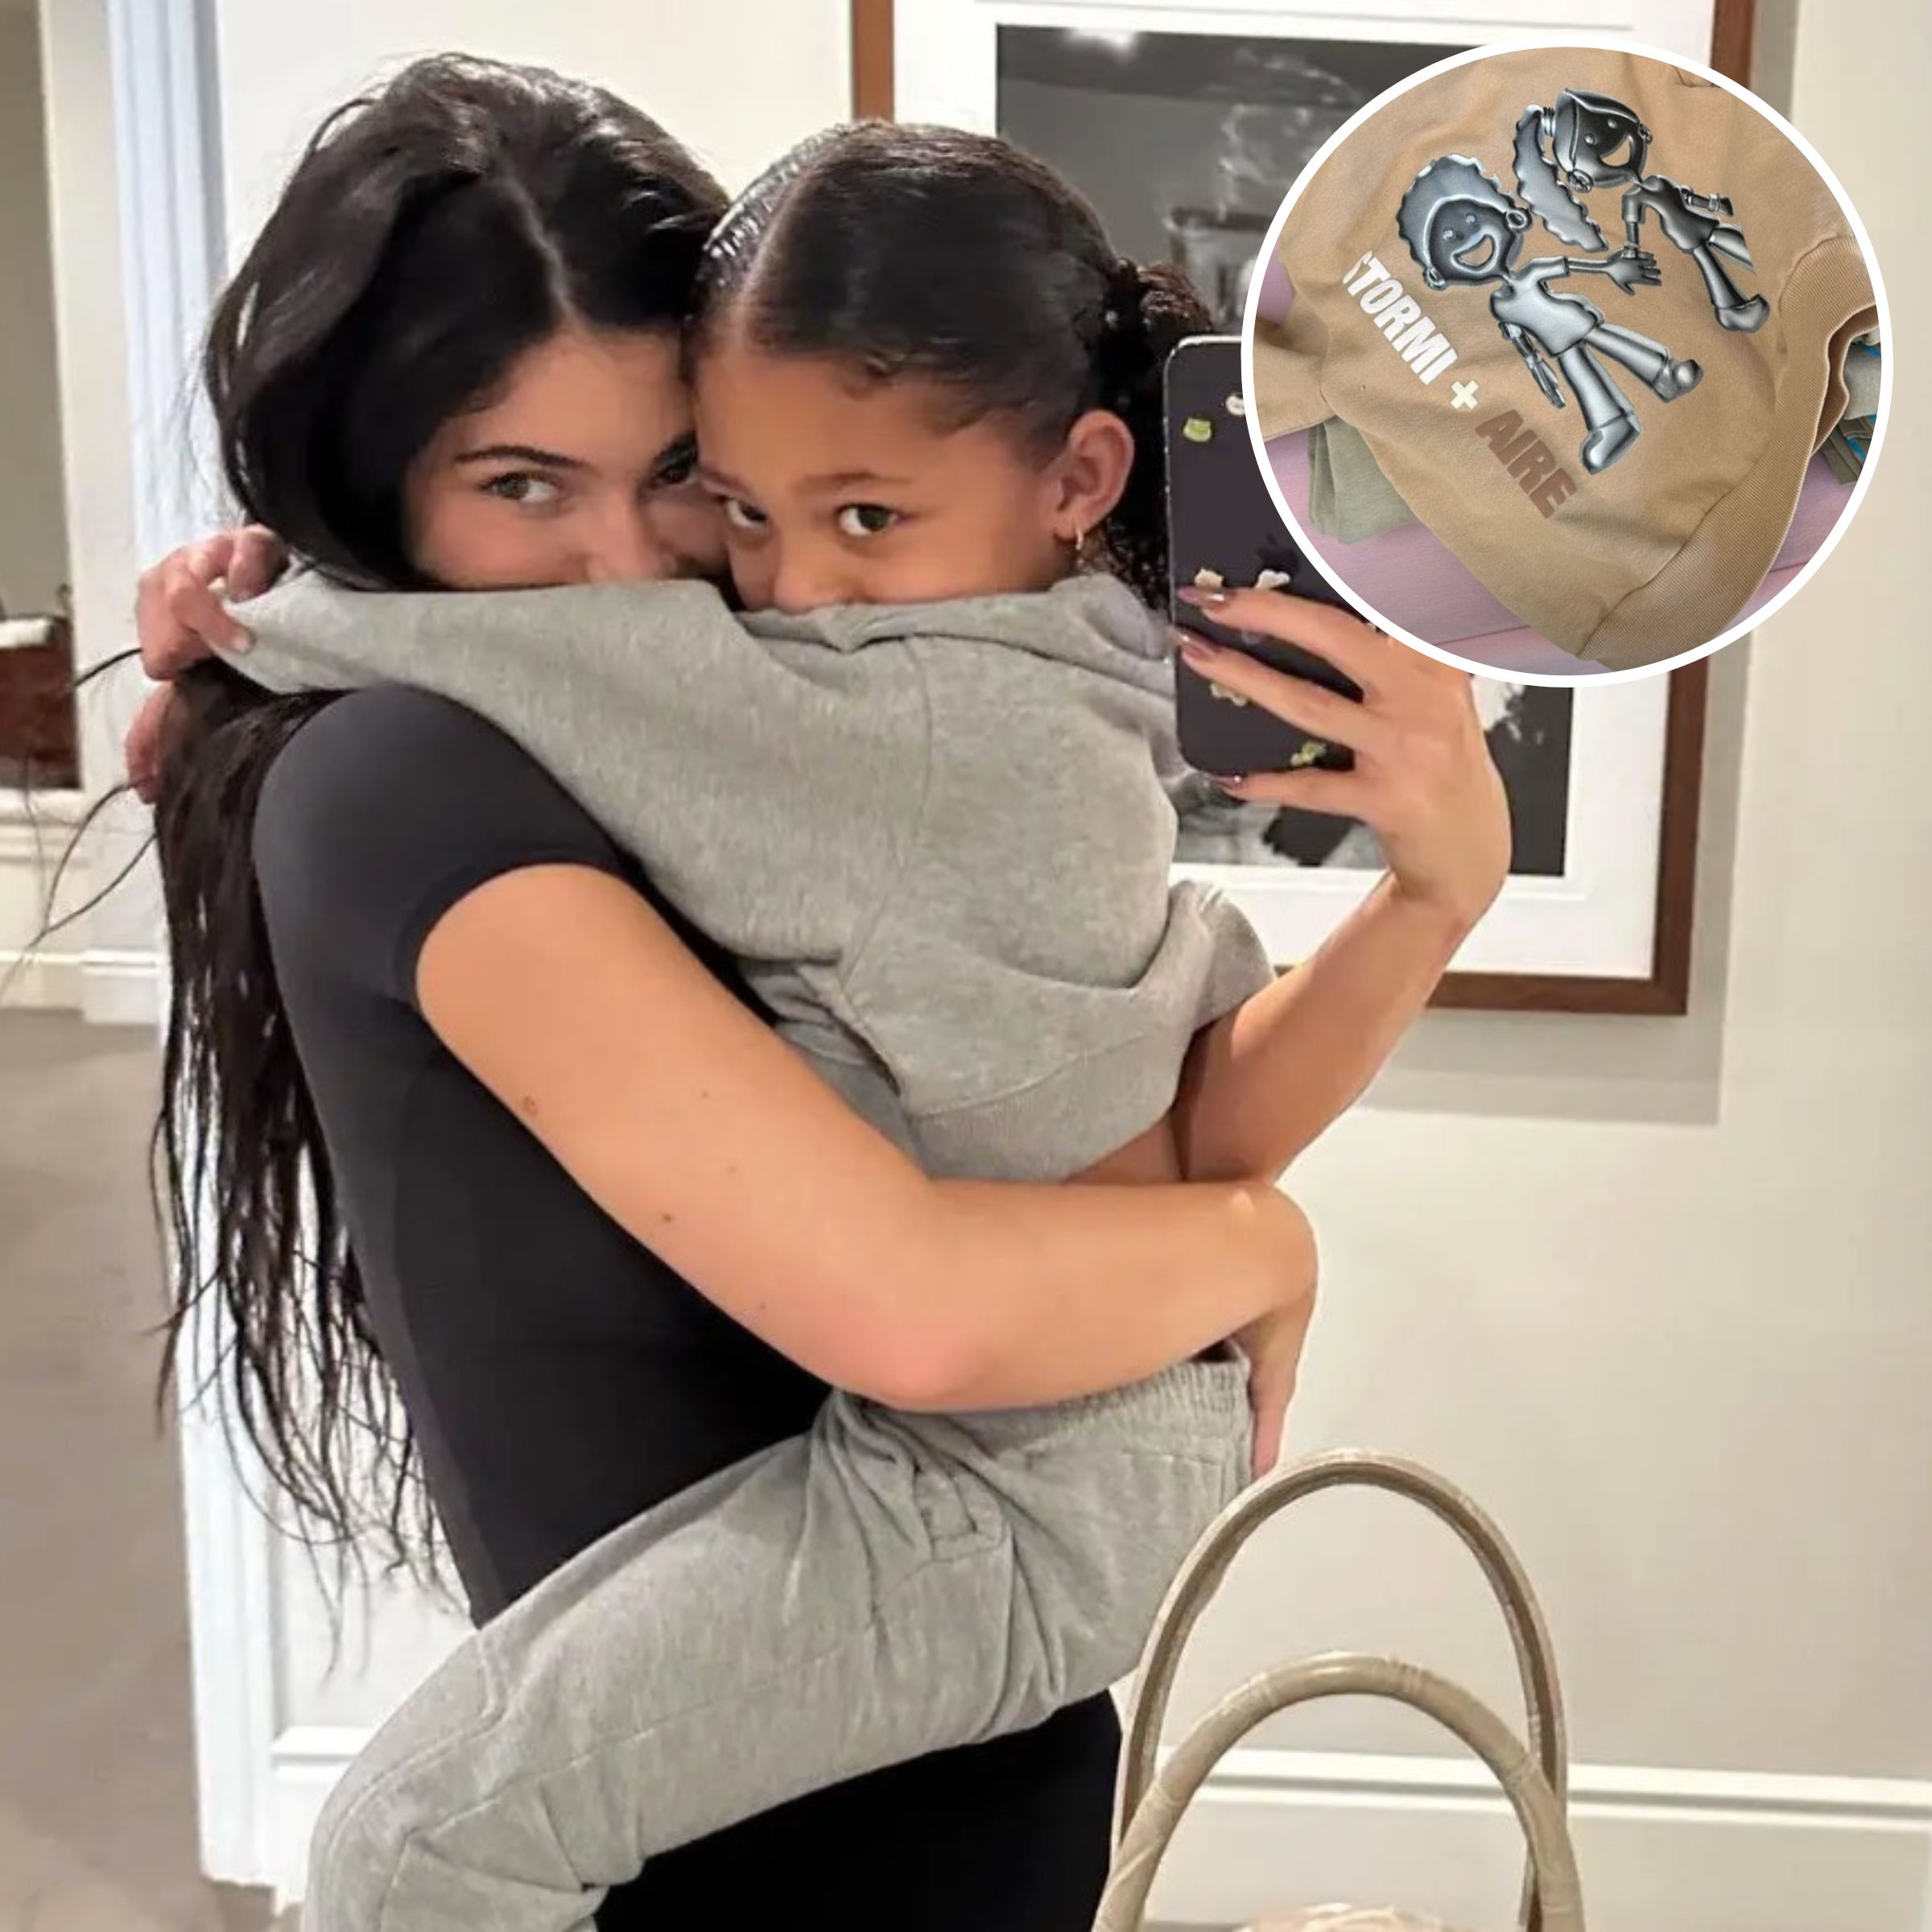 Stormi Webster's Birthday Party: Kylie Jenner Plans 3-Day Event